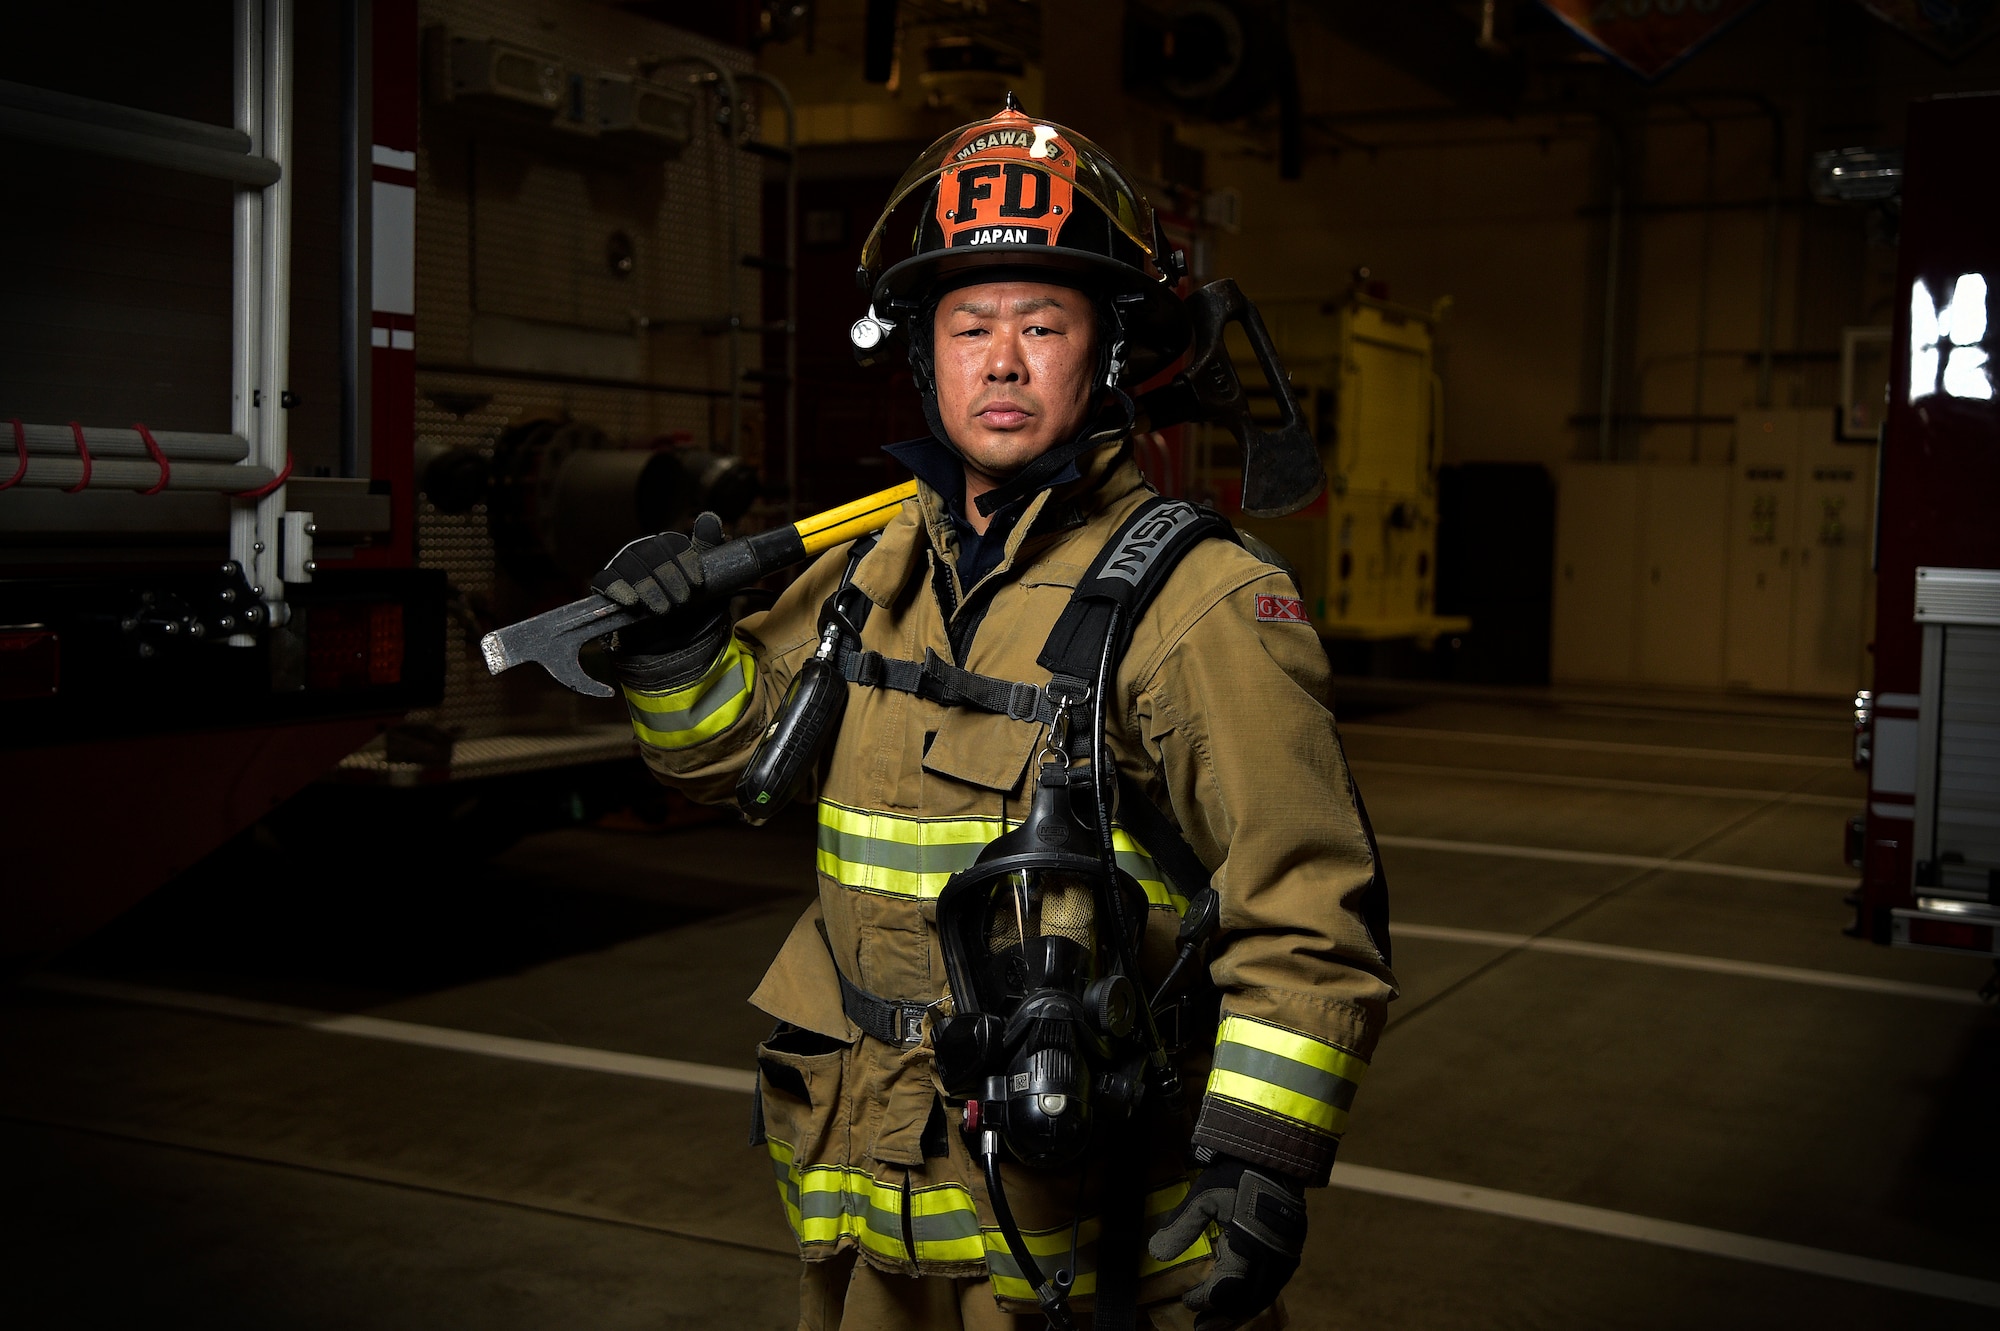 Takuya Kanto, a civilian firefighter with the 35th Civil Engineer Squadron, poses for a photo at Misawa Air Base, Japan, March 3, 2016. Kanto has been a MAB firefighter for over 20 years and frequently dedicates his time to visiting local villages that were affected by the 2011 Great East Japan earthquake and tsunami. Together with American military members, Kanto continues to strengthen the relationship between the U.S. and Japan by being an active member of the local community. (U.S. Air Force photo by Senior Airman Patrick S. Ciccarone) 